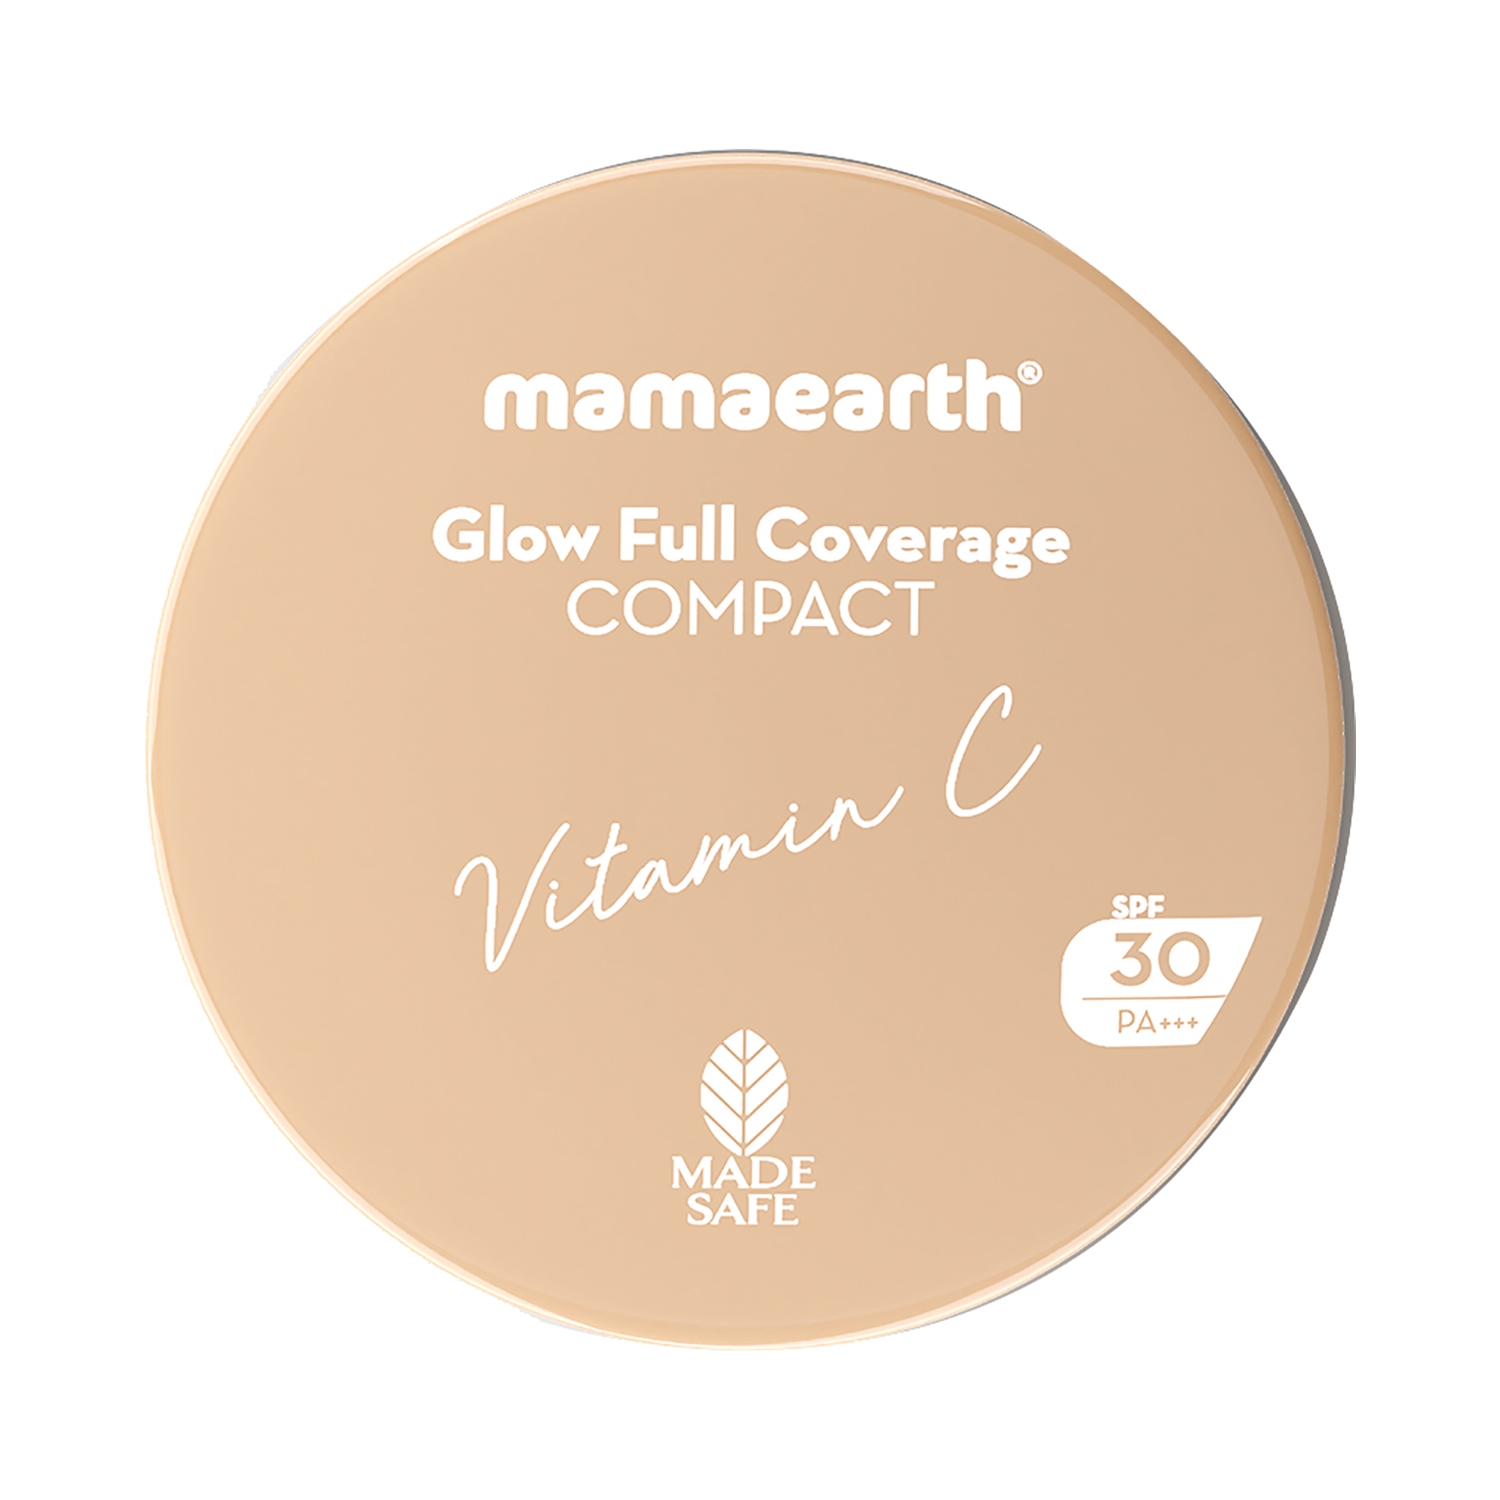 Mamaearth | Mamaearth Glow Full Coverage Compact SPF 30 PA+++ With Vitamin C - 03 Crème Glow (9g)